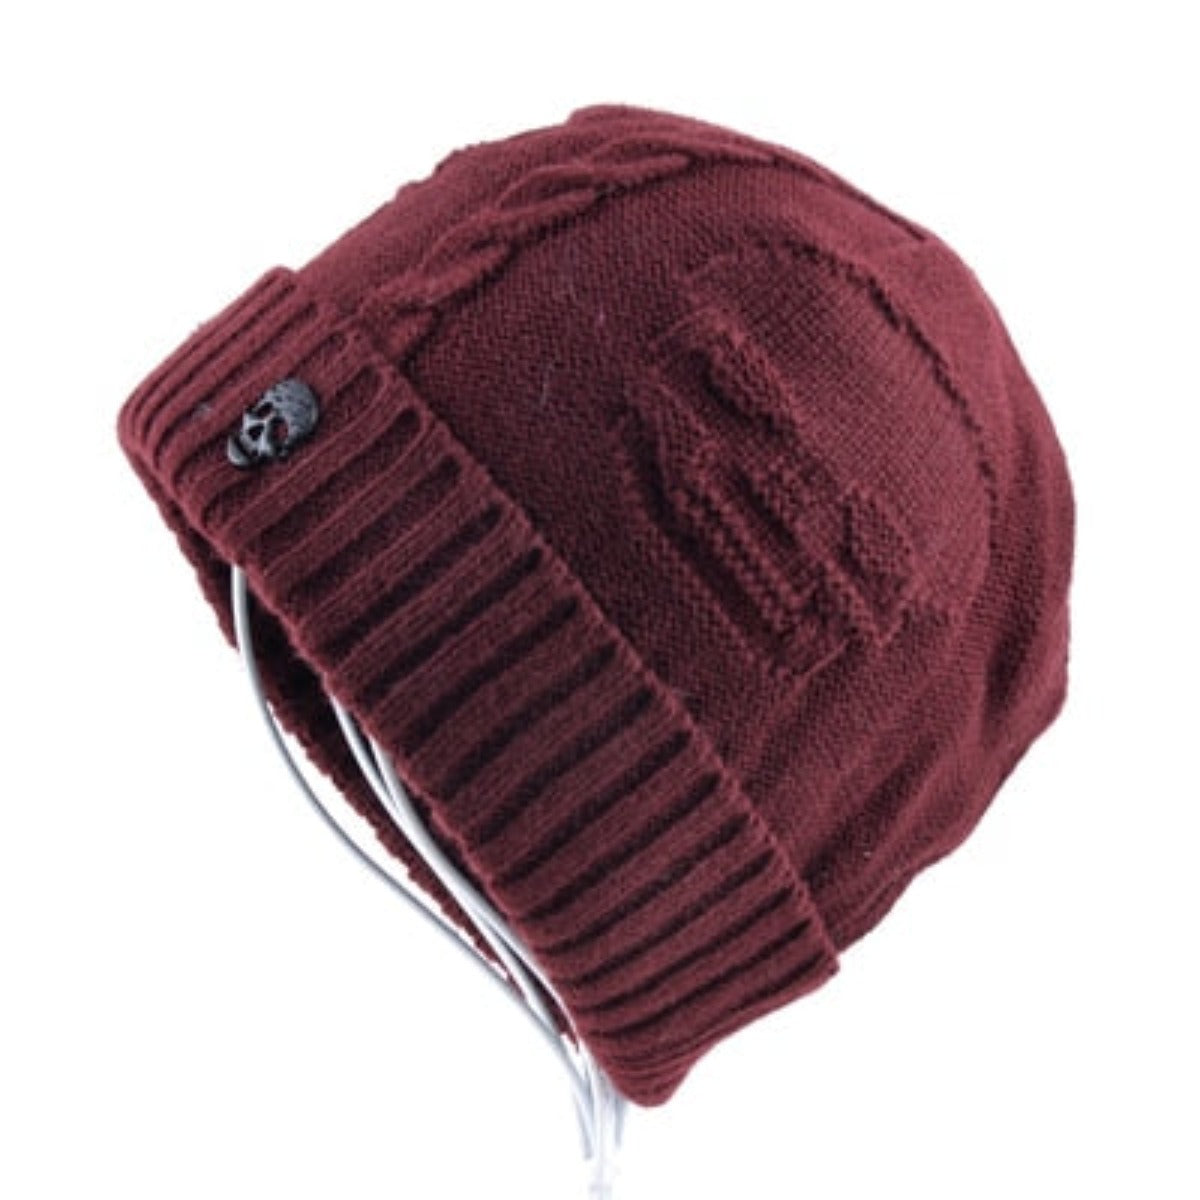 A comfortable burgundy knitted skull pattern beanie hat with earphones.